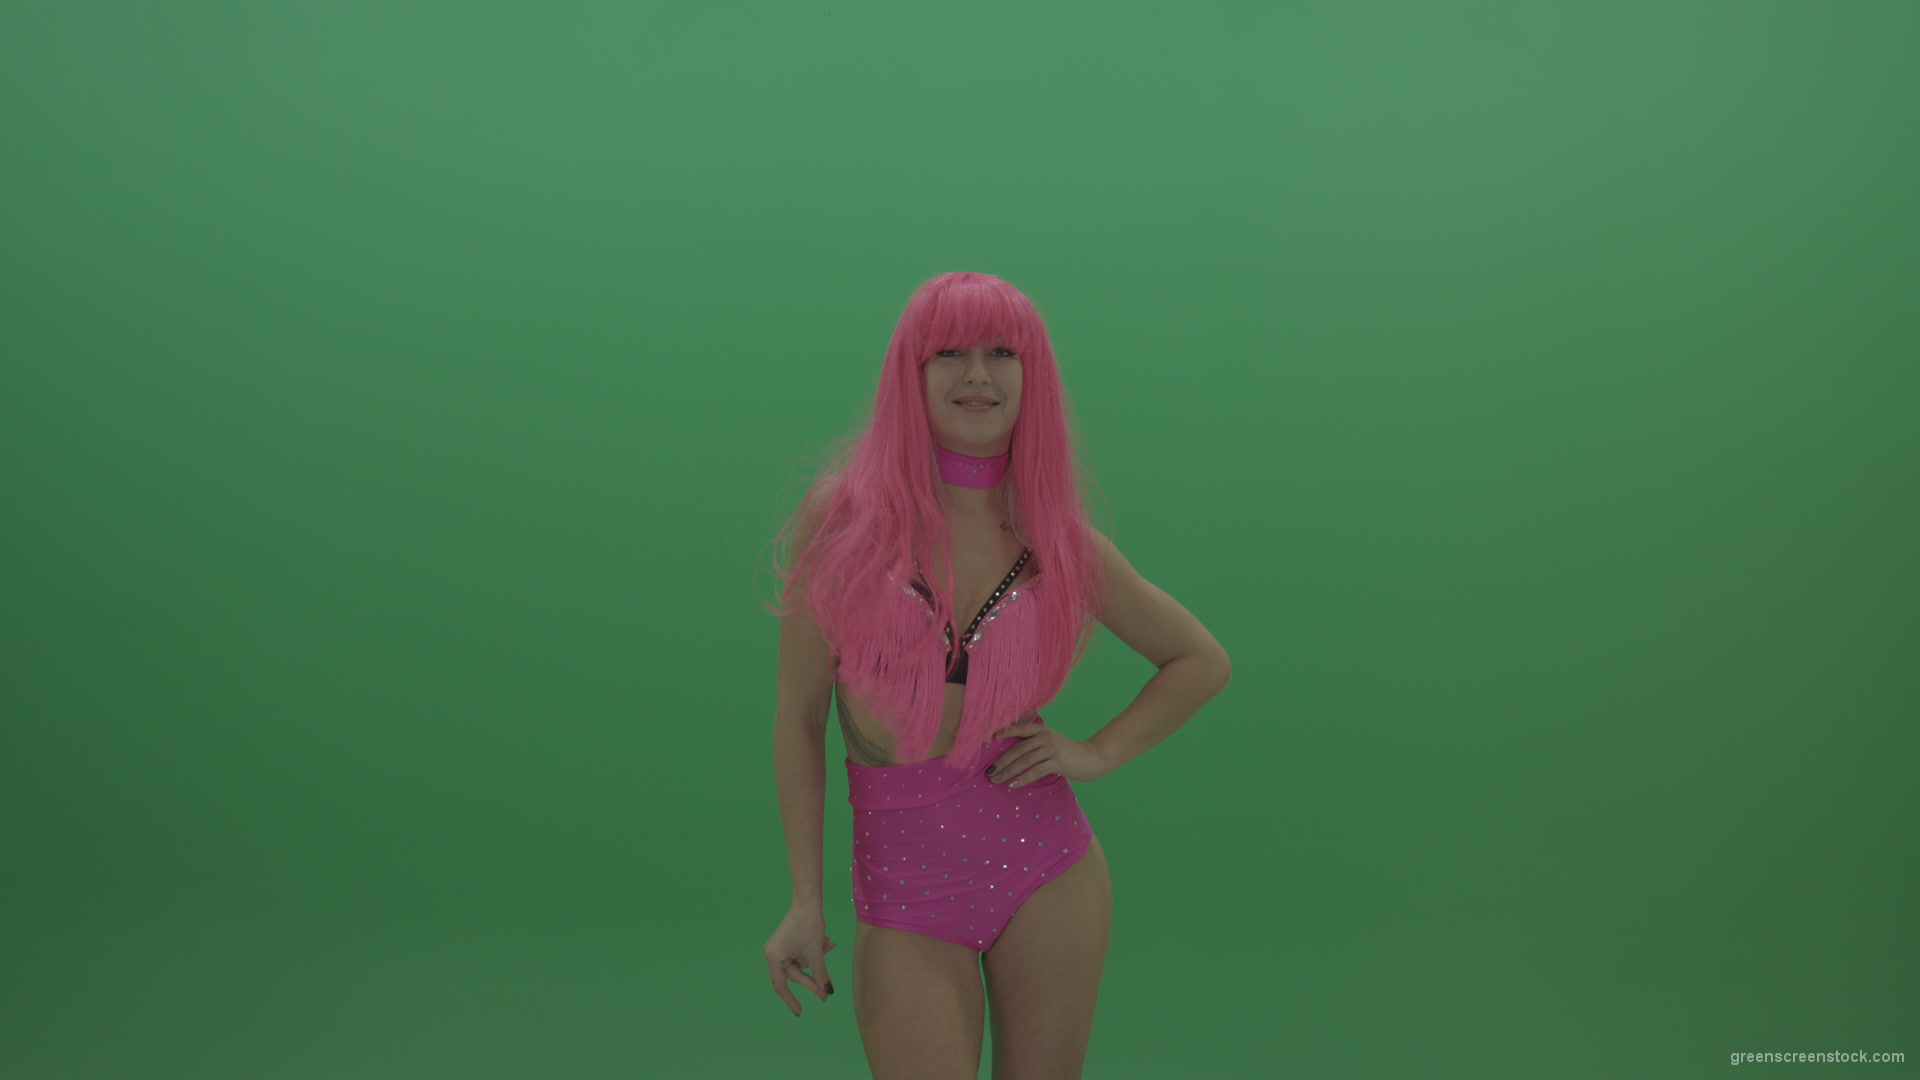 Gogo-dancer-in-pink-displays-an-amazing-pose-over-chromakey-background_007 Green Screen Stock